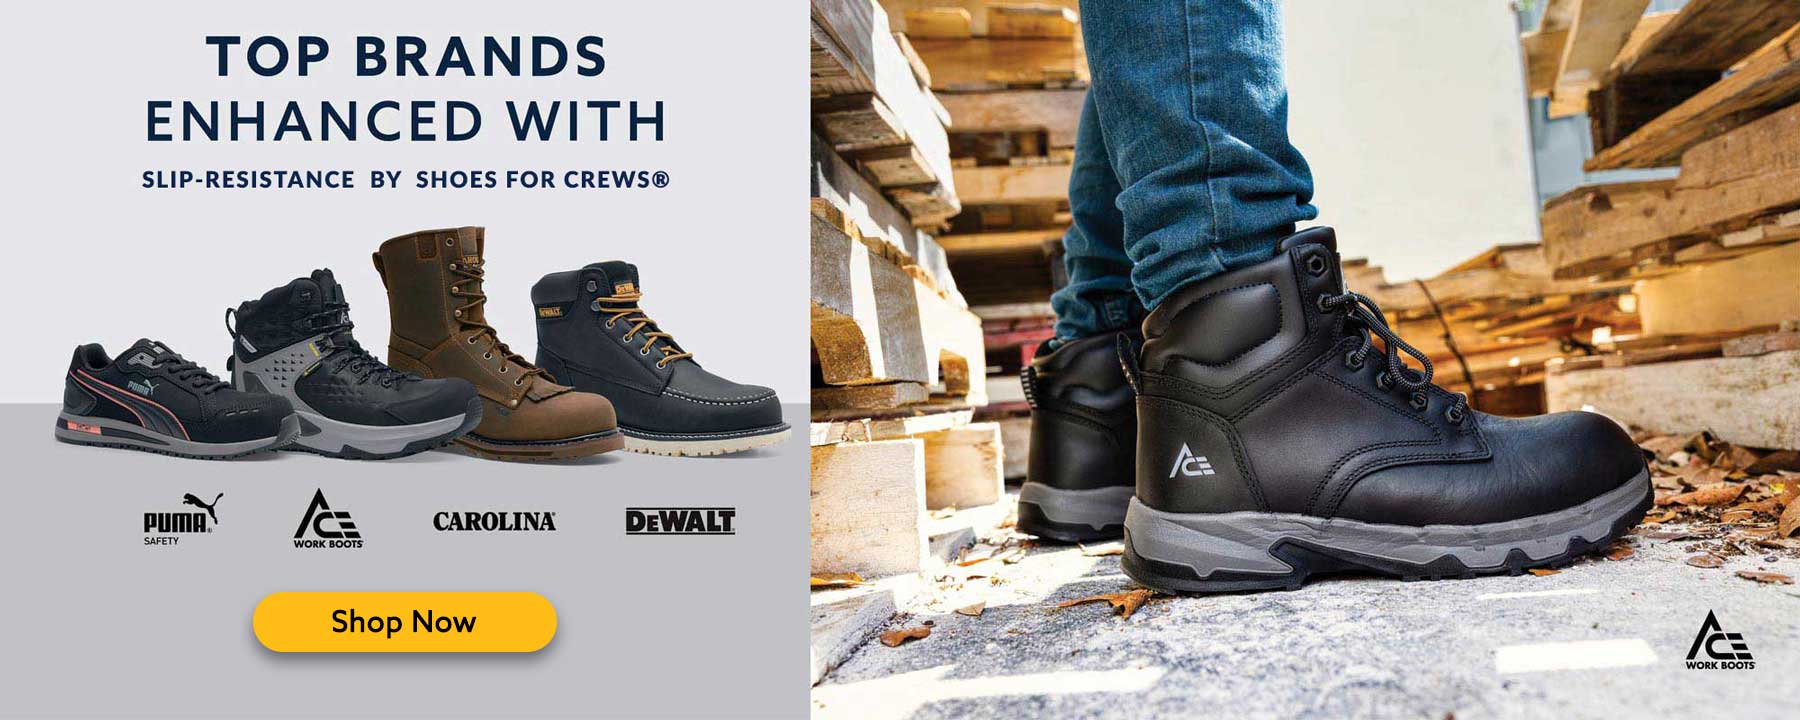 Industrial Top Brands Enhanced with Slip-Resistance By Shoes For Crews 